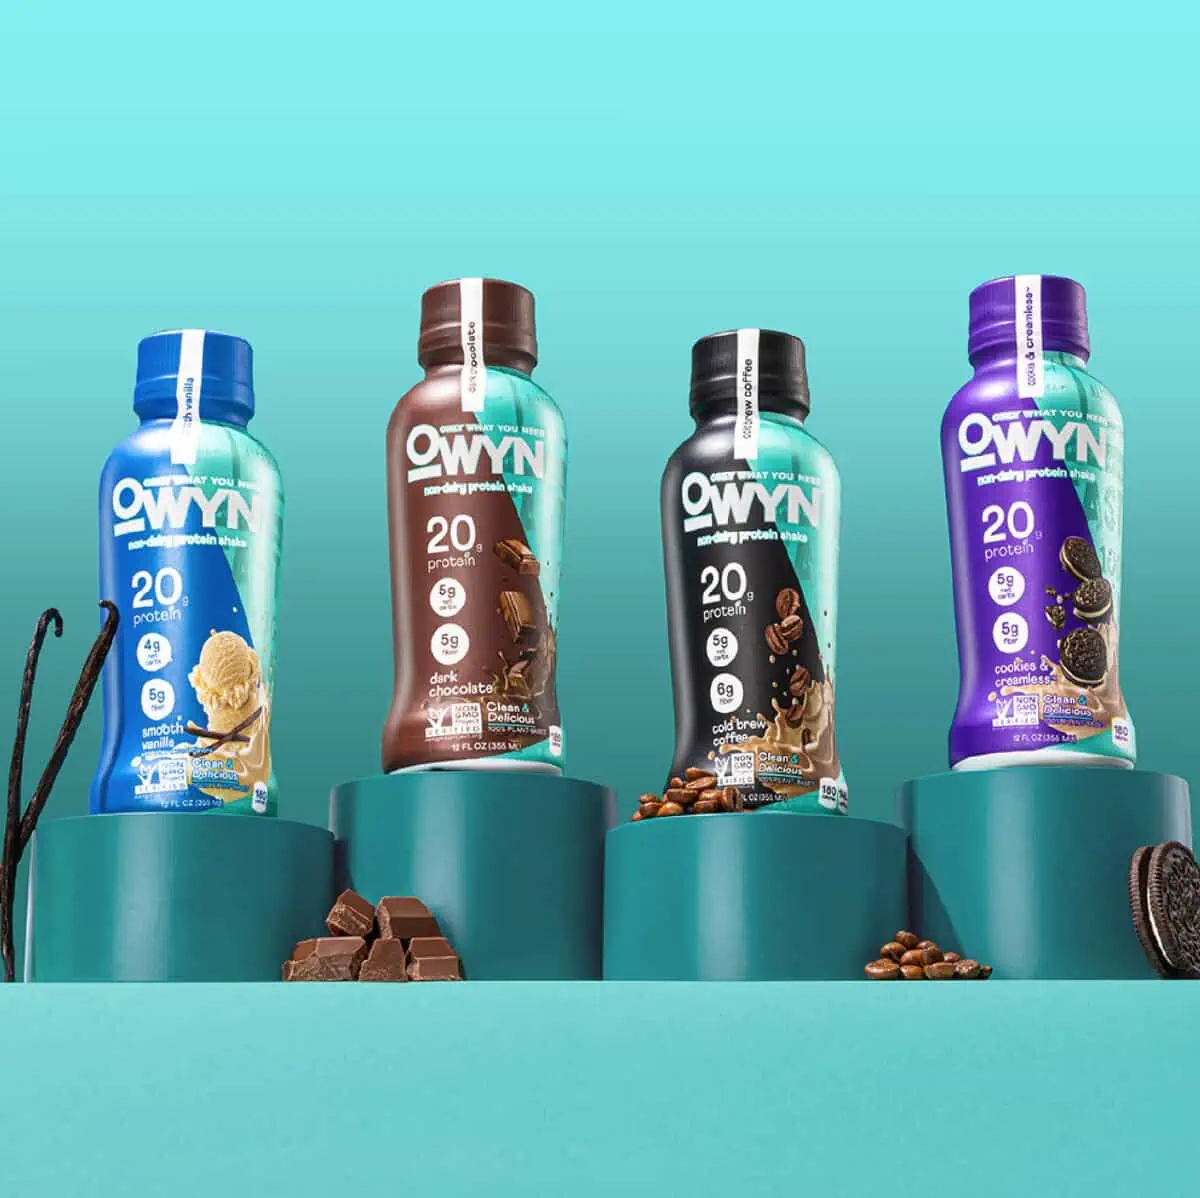 Four bottles of Owyn non-dairy protein shakes in four different flavors against a teal background.